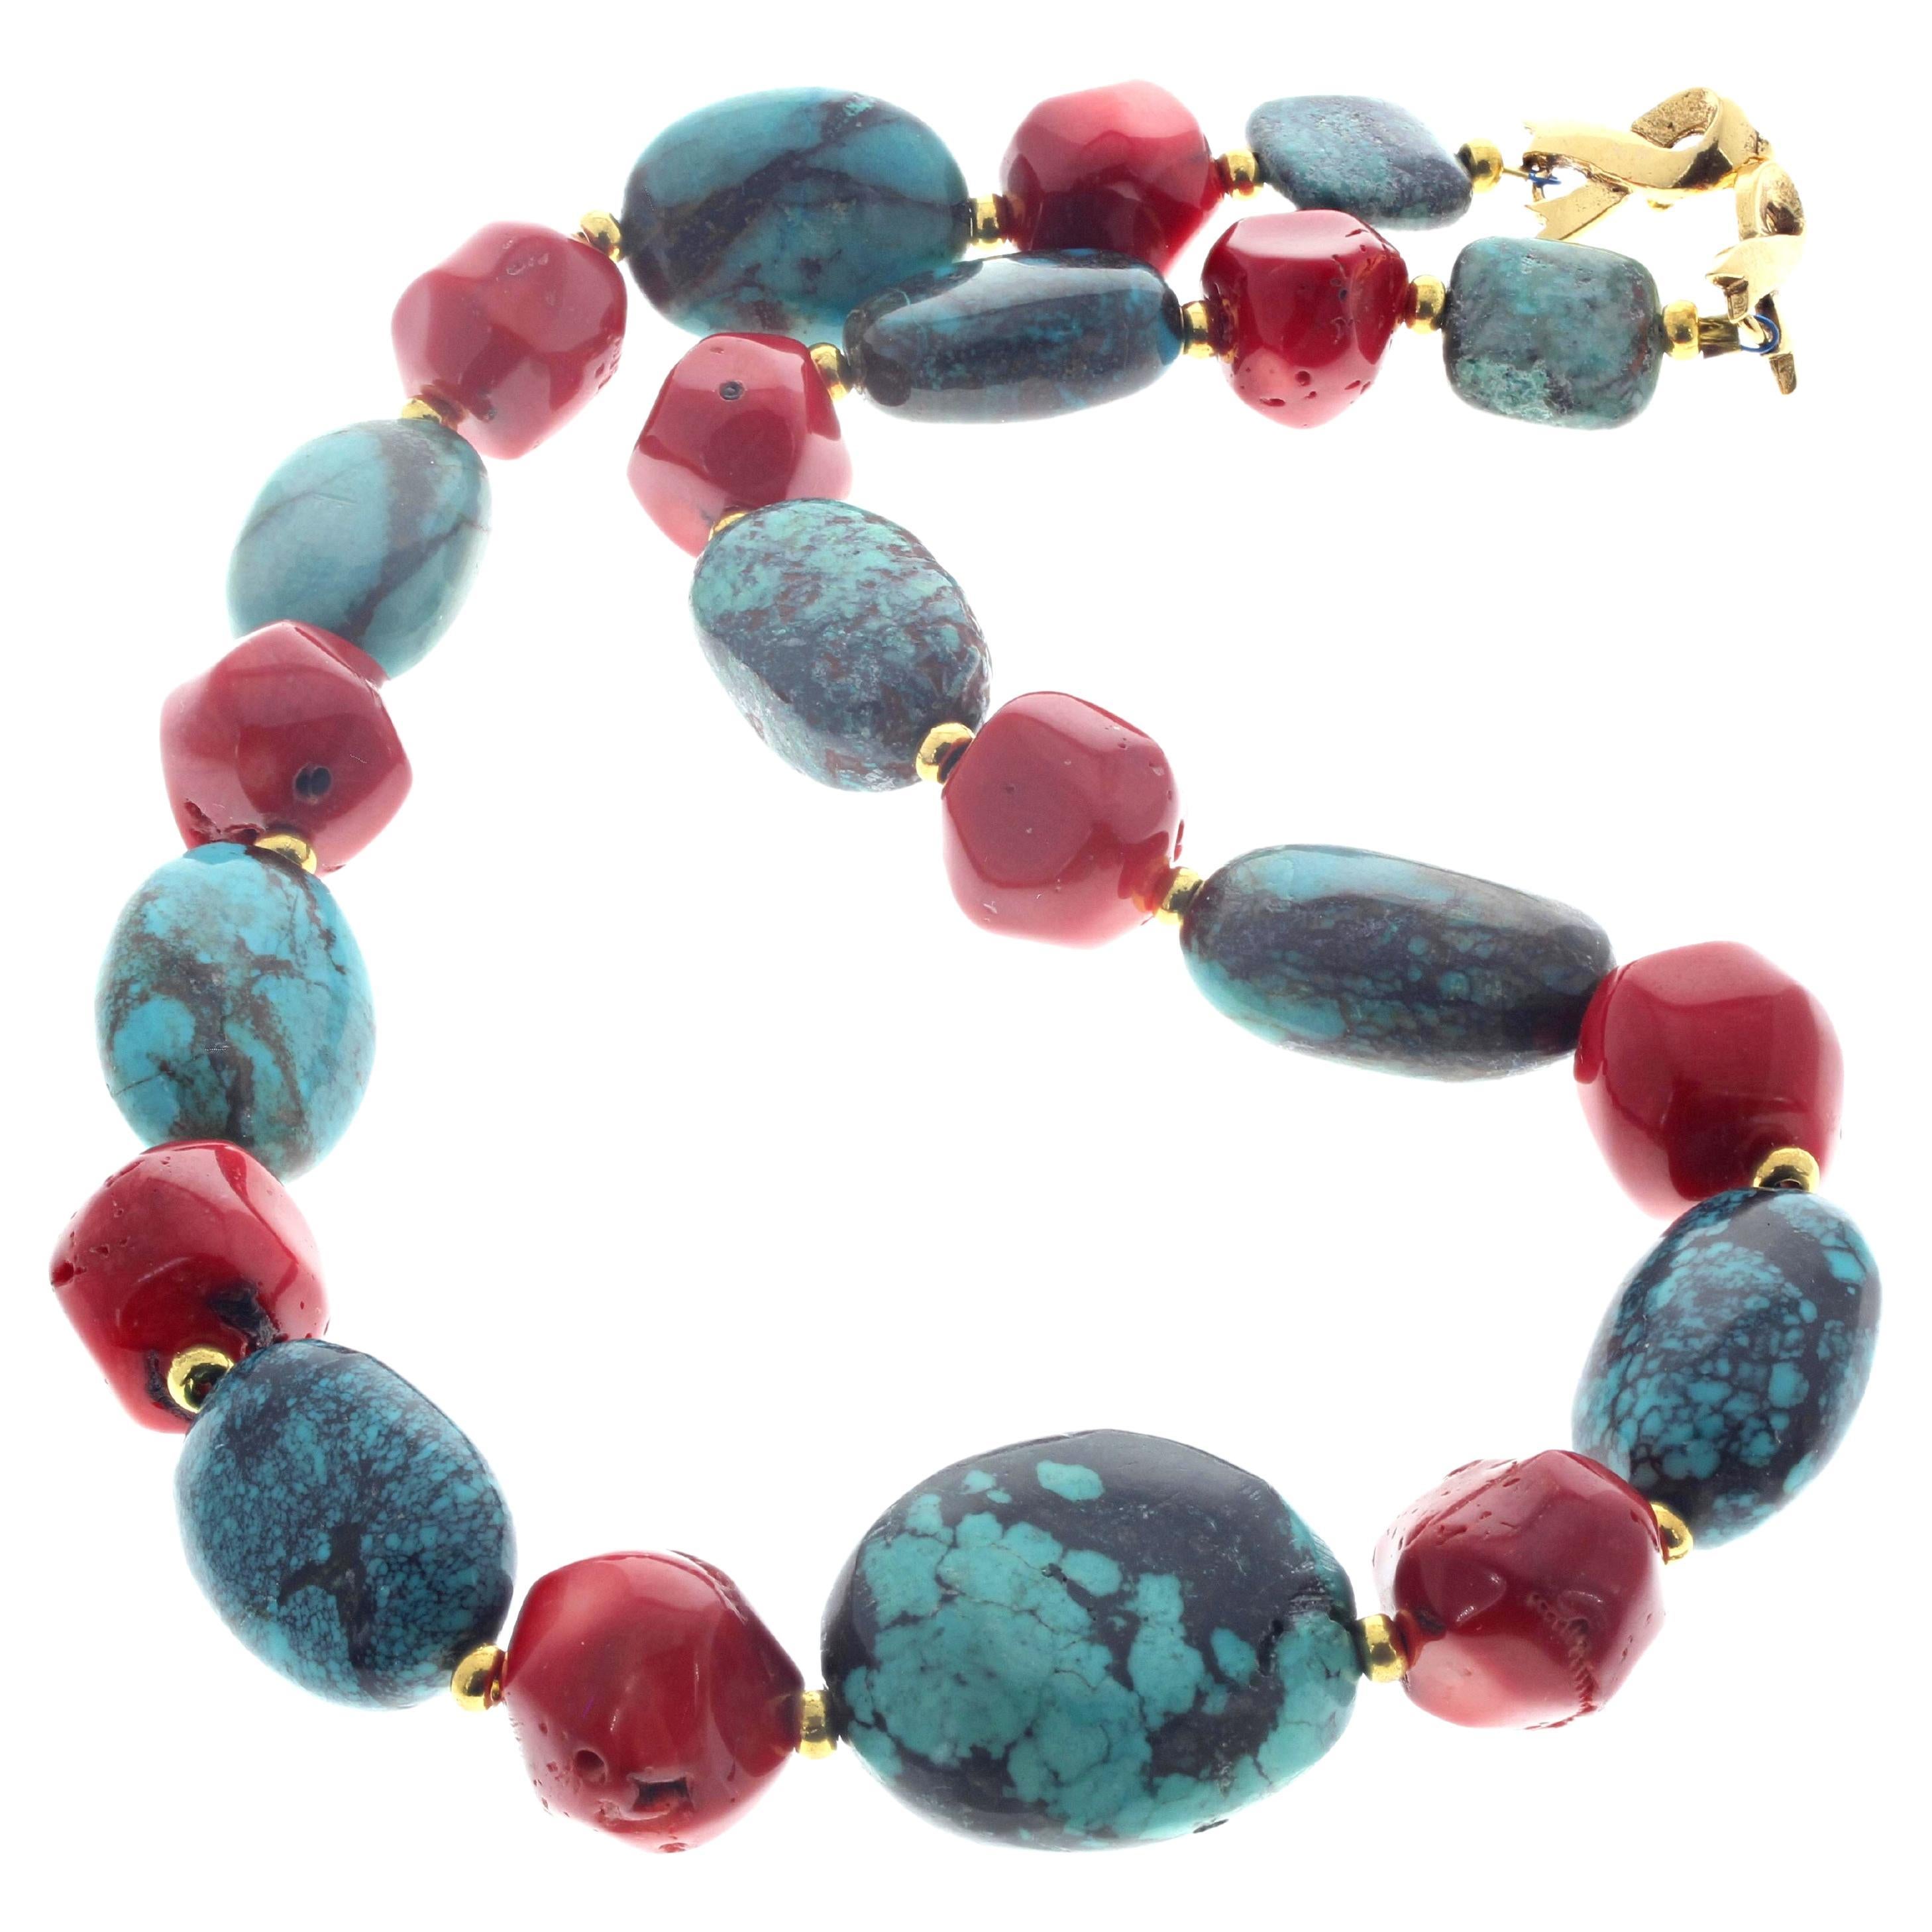 This lovely single strand of real natural Turquoise and real natural red Coral is 19 inches long.  The largest Turquoise is approximately 30mm x 26mm.  The largest roundish Coral are approximately 17mm.  The clasp is an easy to use gold plated hook